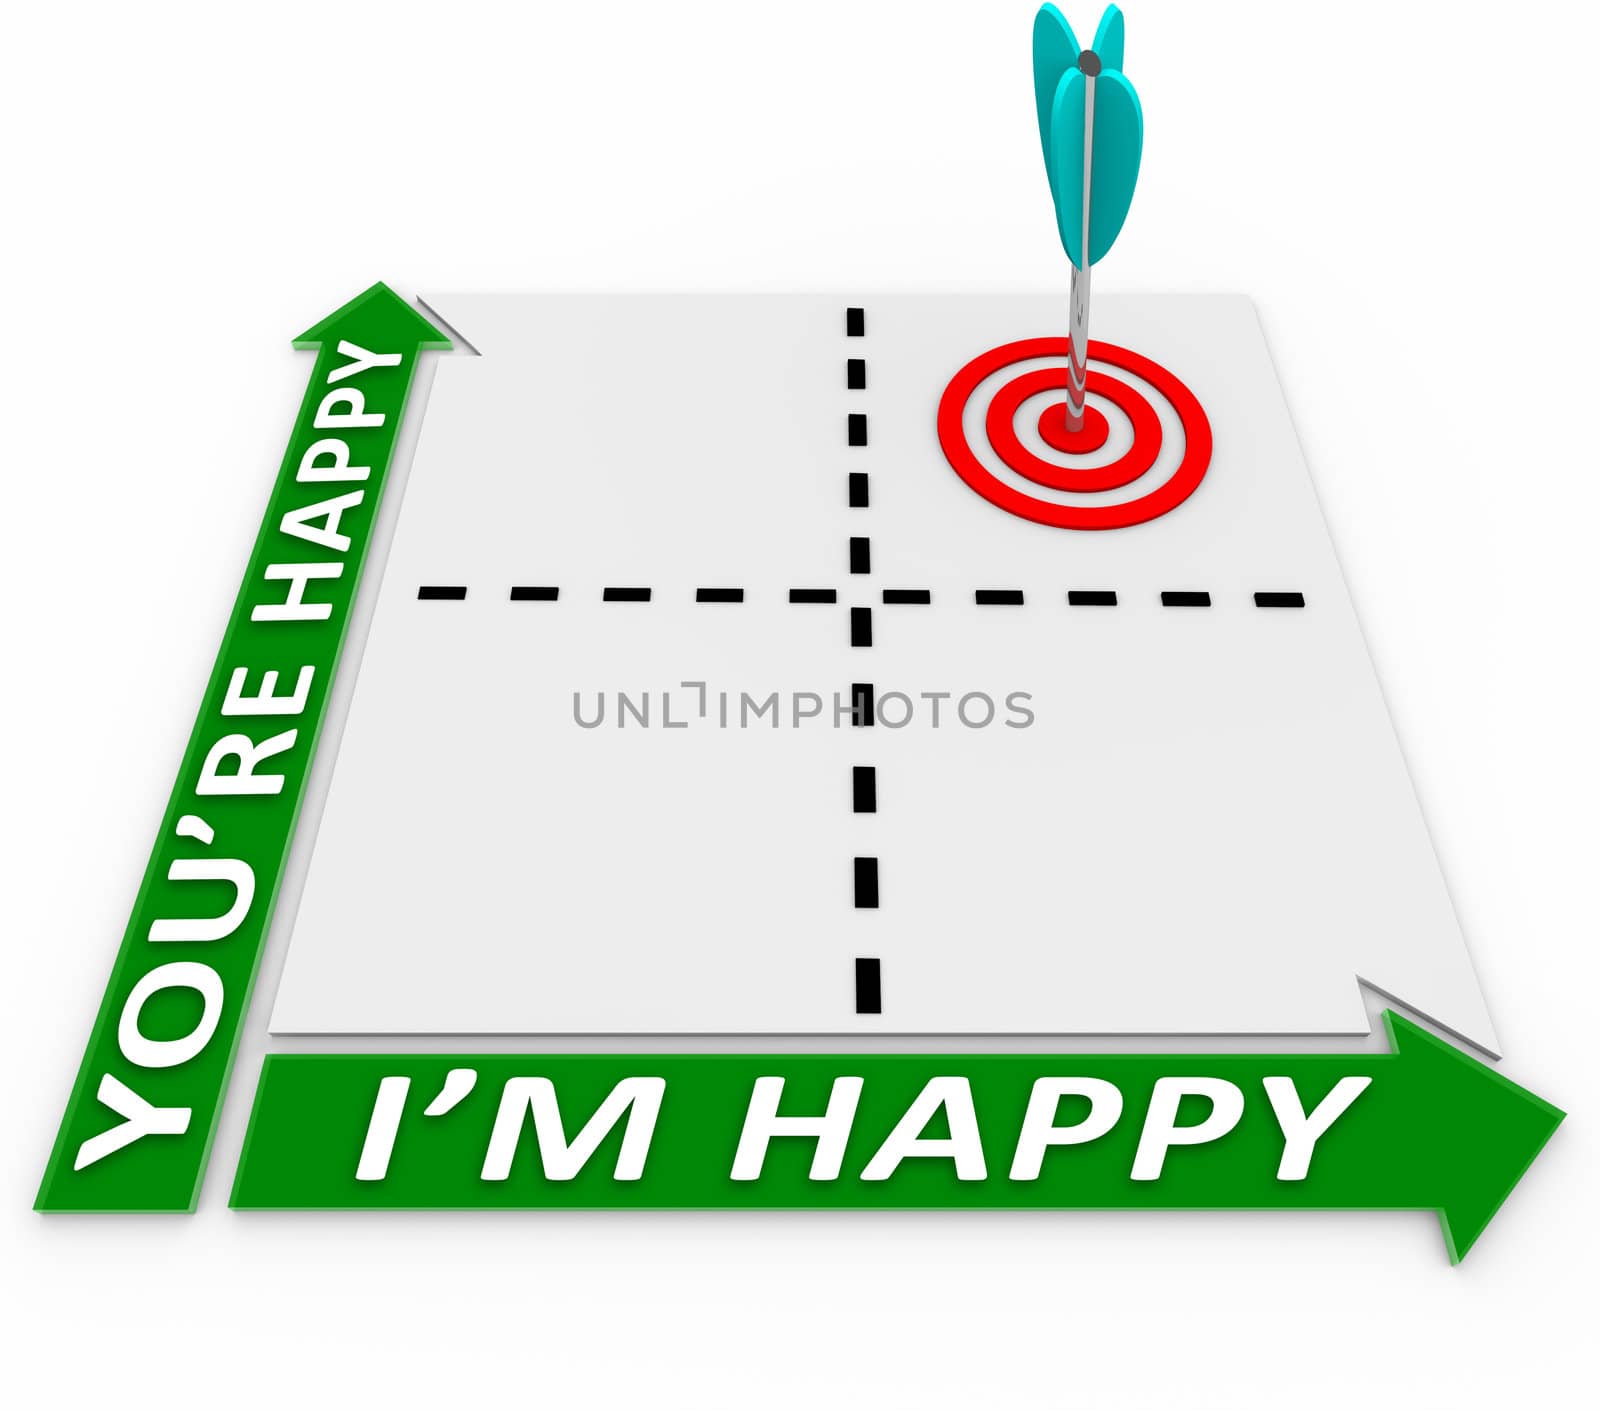 A matrix with an arrow in a target in squares representing I'm Happy You're Happy, aiming for the goal of mutual interests and common goals for satisfaction of both sides in negotiation